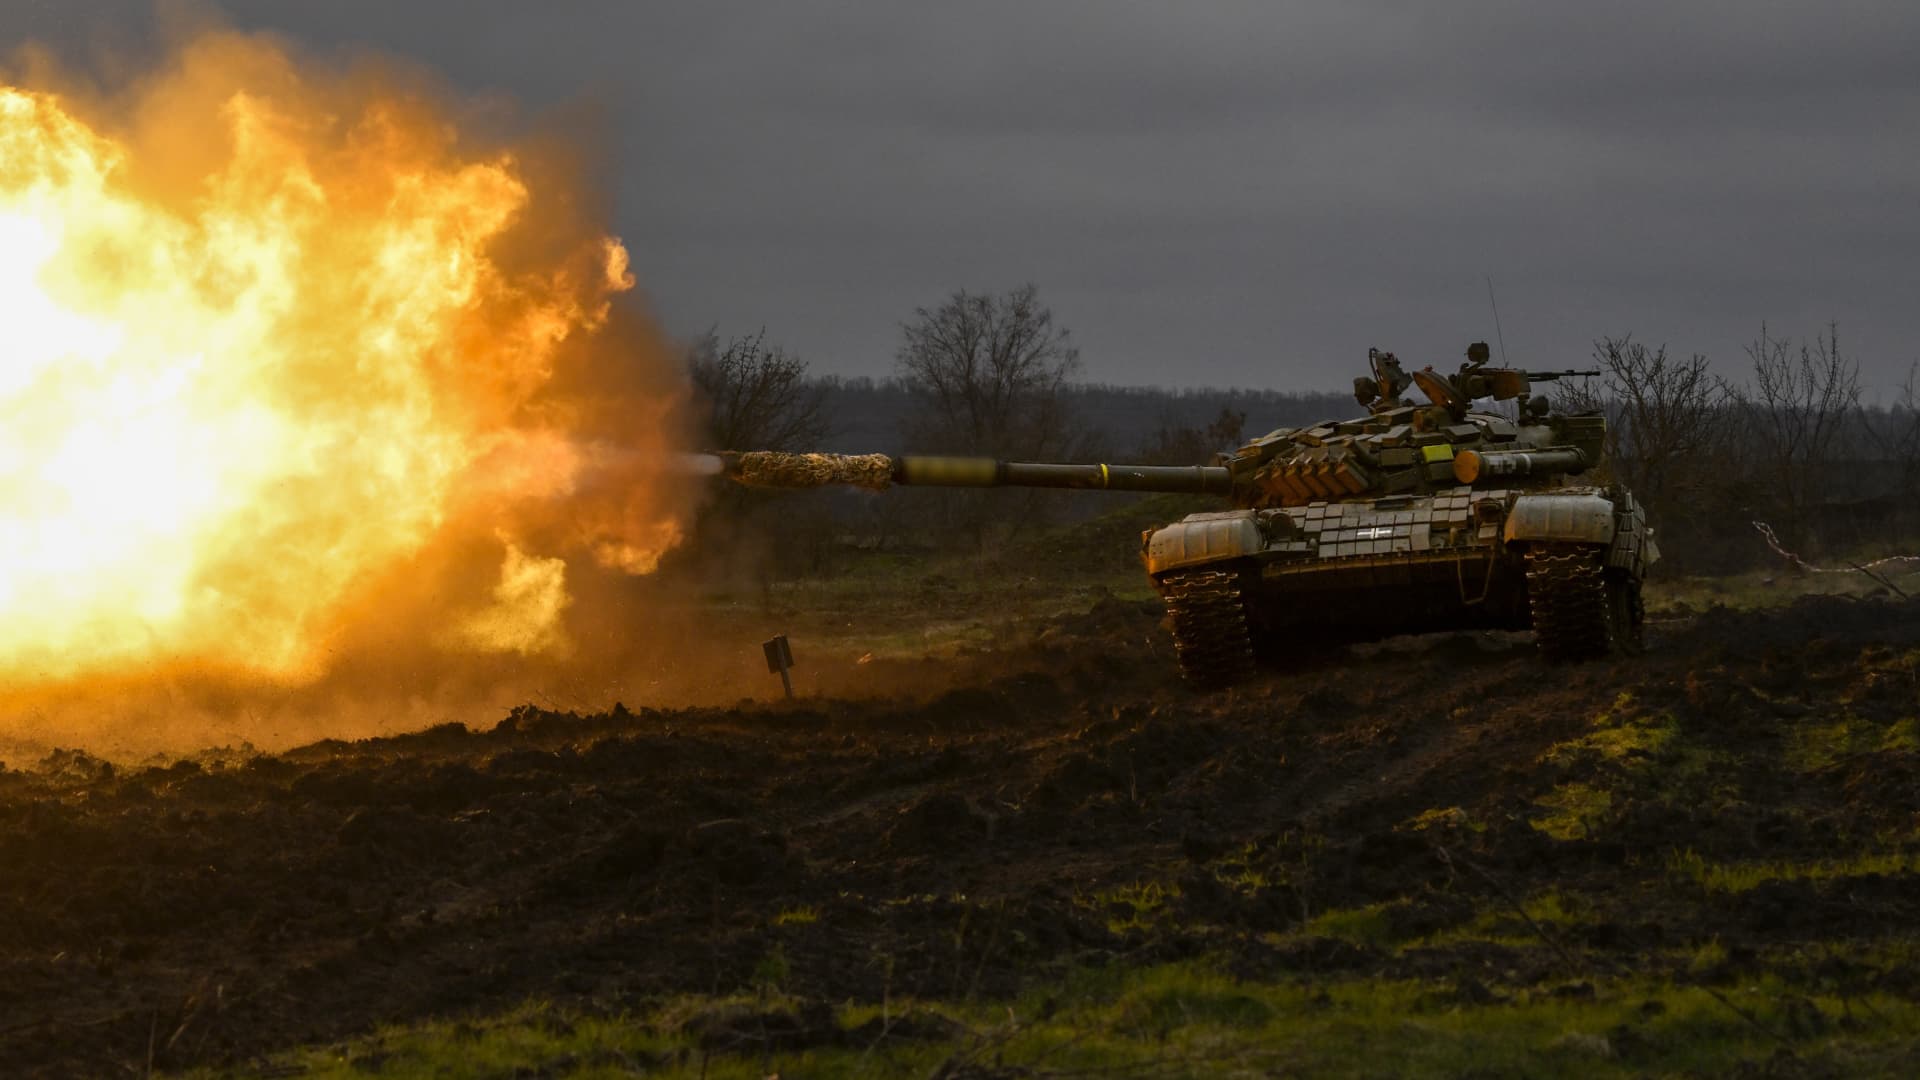 (EDITORS NOTE: The tank number has been blurred) A Ukrainian tank performs during firing practice amid Russia-Ukraine war on the frontline of Donetsk Oblast, Ukraine on March 29, 2023. 